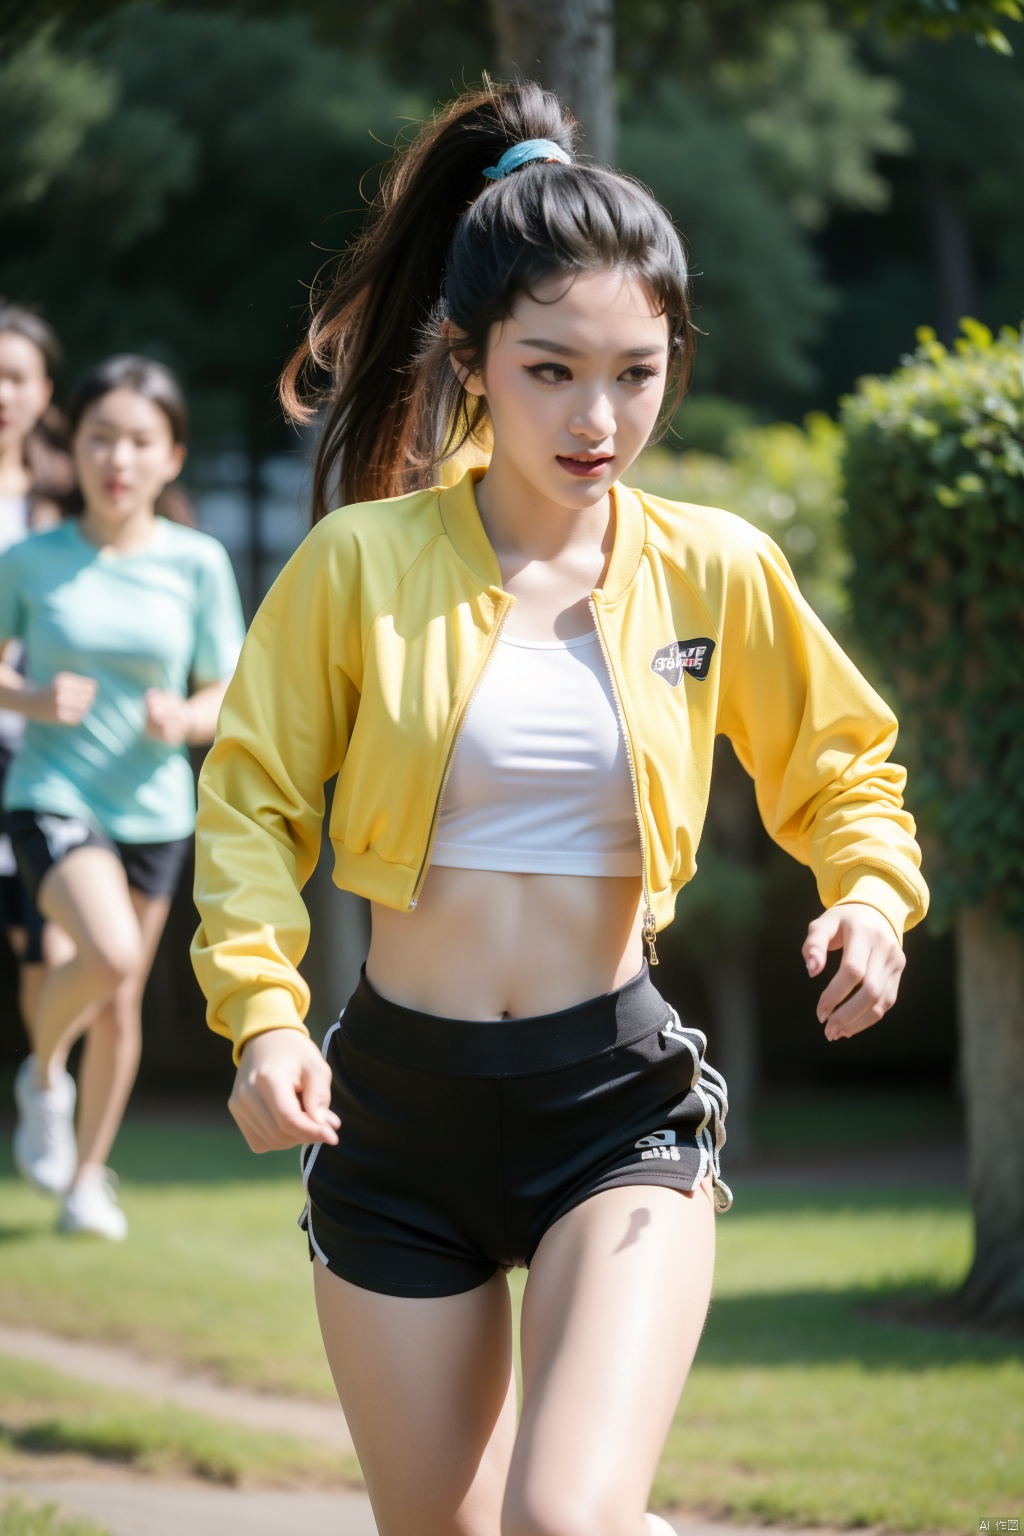 Action shot, Sport quality, (adventure:1.4), action shot, 1girl, yellow jacket, Running in the park, ponytail swaying, tree shadows, midriff, sunny afternoon, in summer, bird's eye view, DSLR photo, high-speed, bokeh, sports photography, 4k, sharp details, sporty girls, nature design, Oil painting.